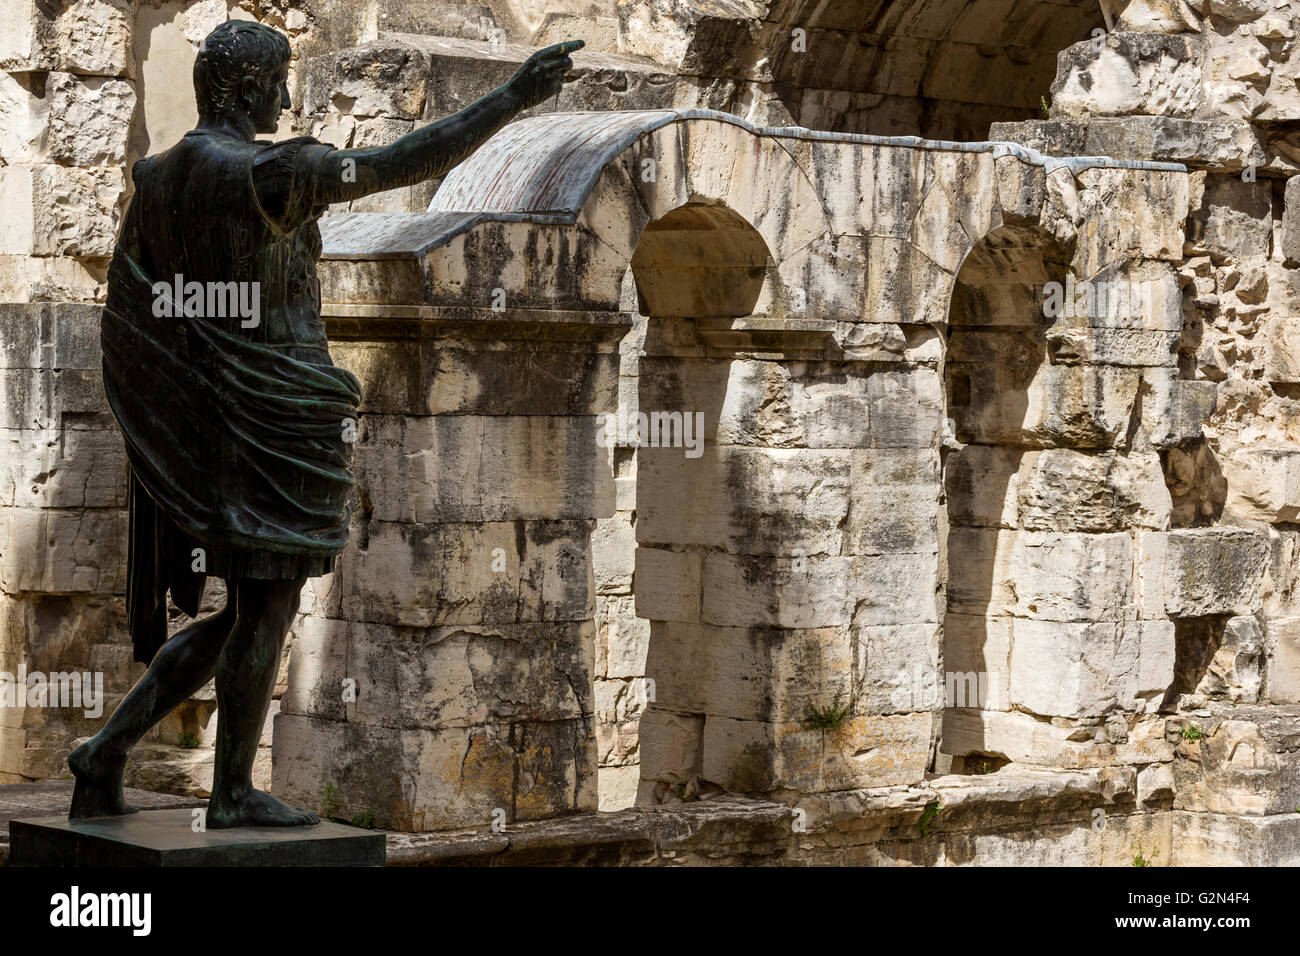 Statue of Auguste, gate of Auguste, Nimes, Gard, France Stock Photo